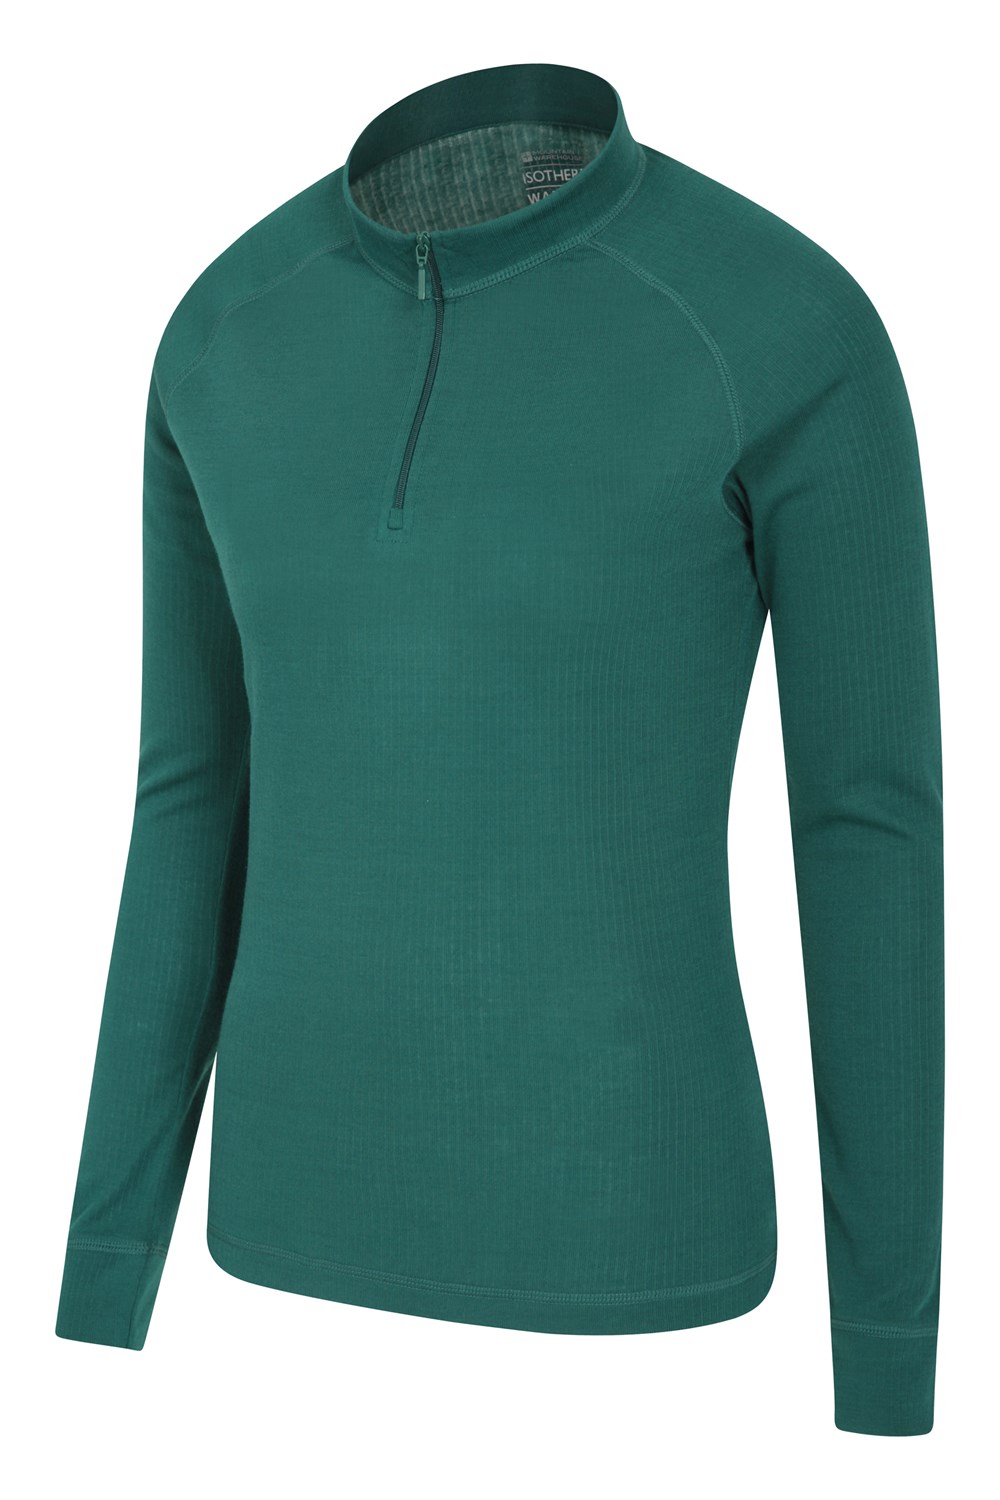 Mountain Warehouse Womens Long Sleeved Zip Neck Top Base Layer ...